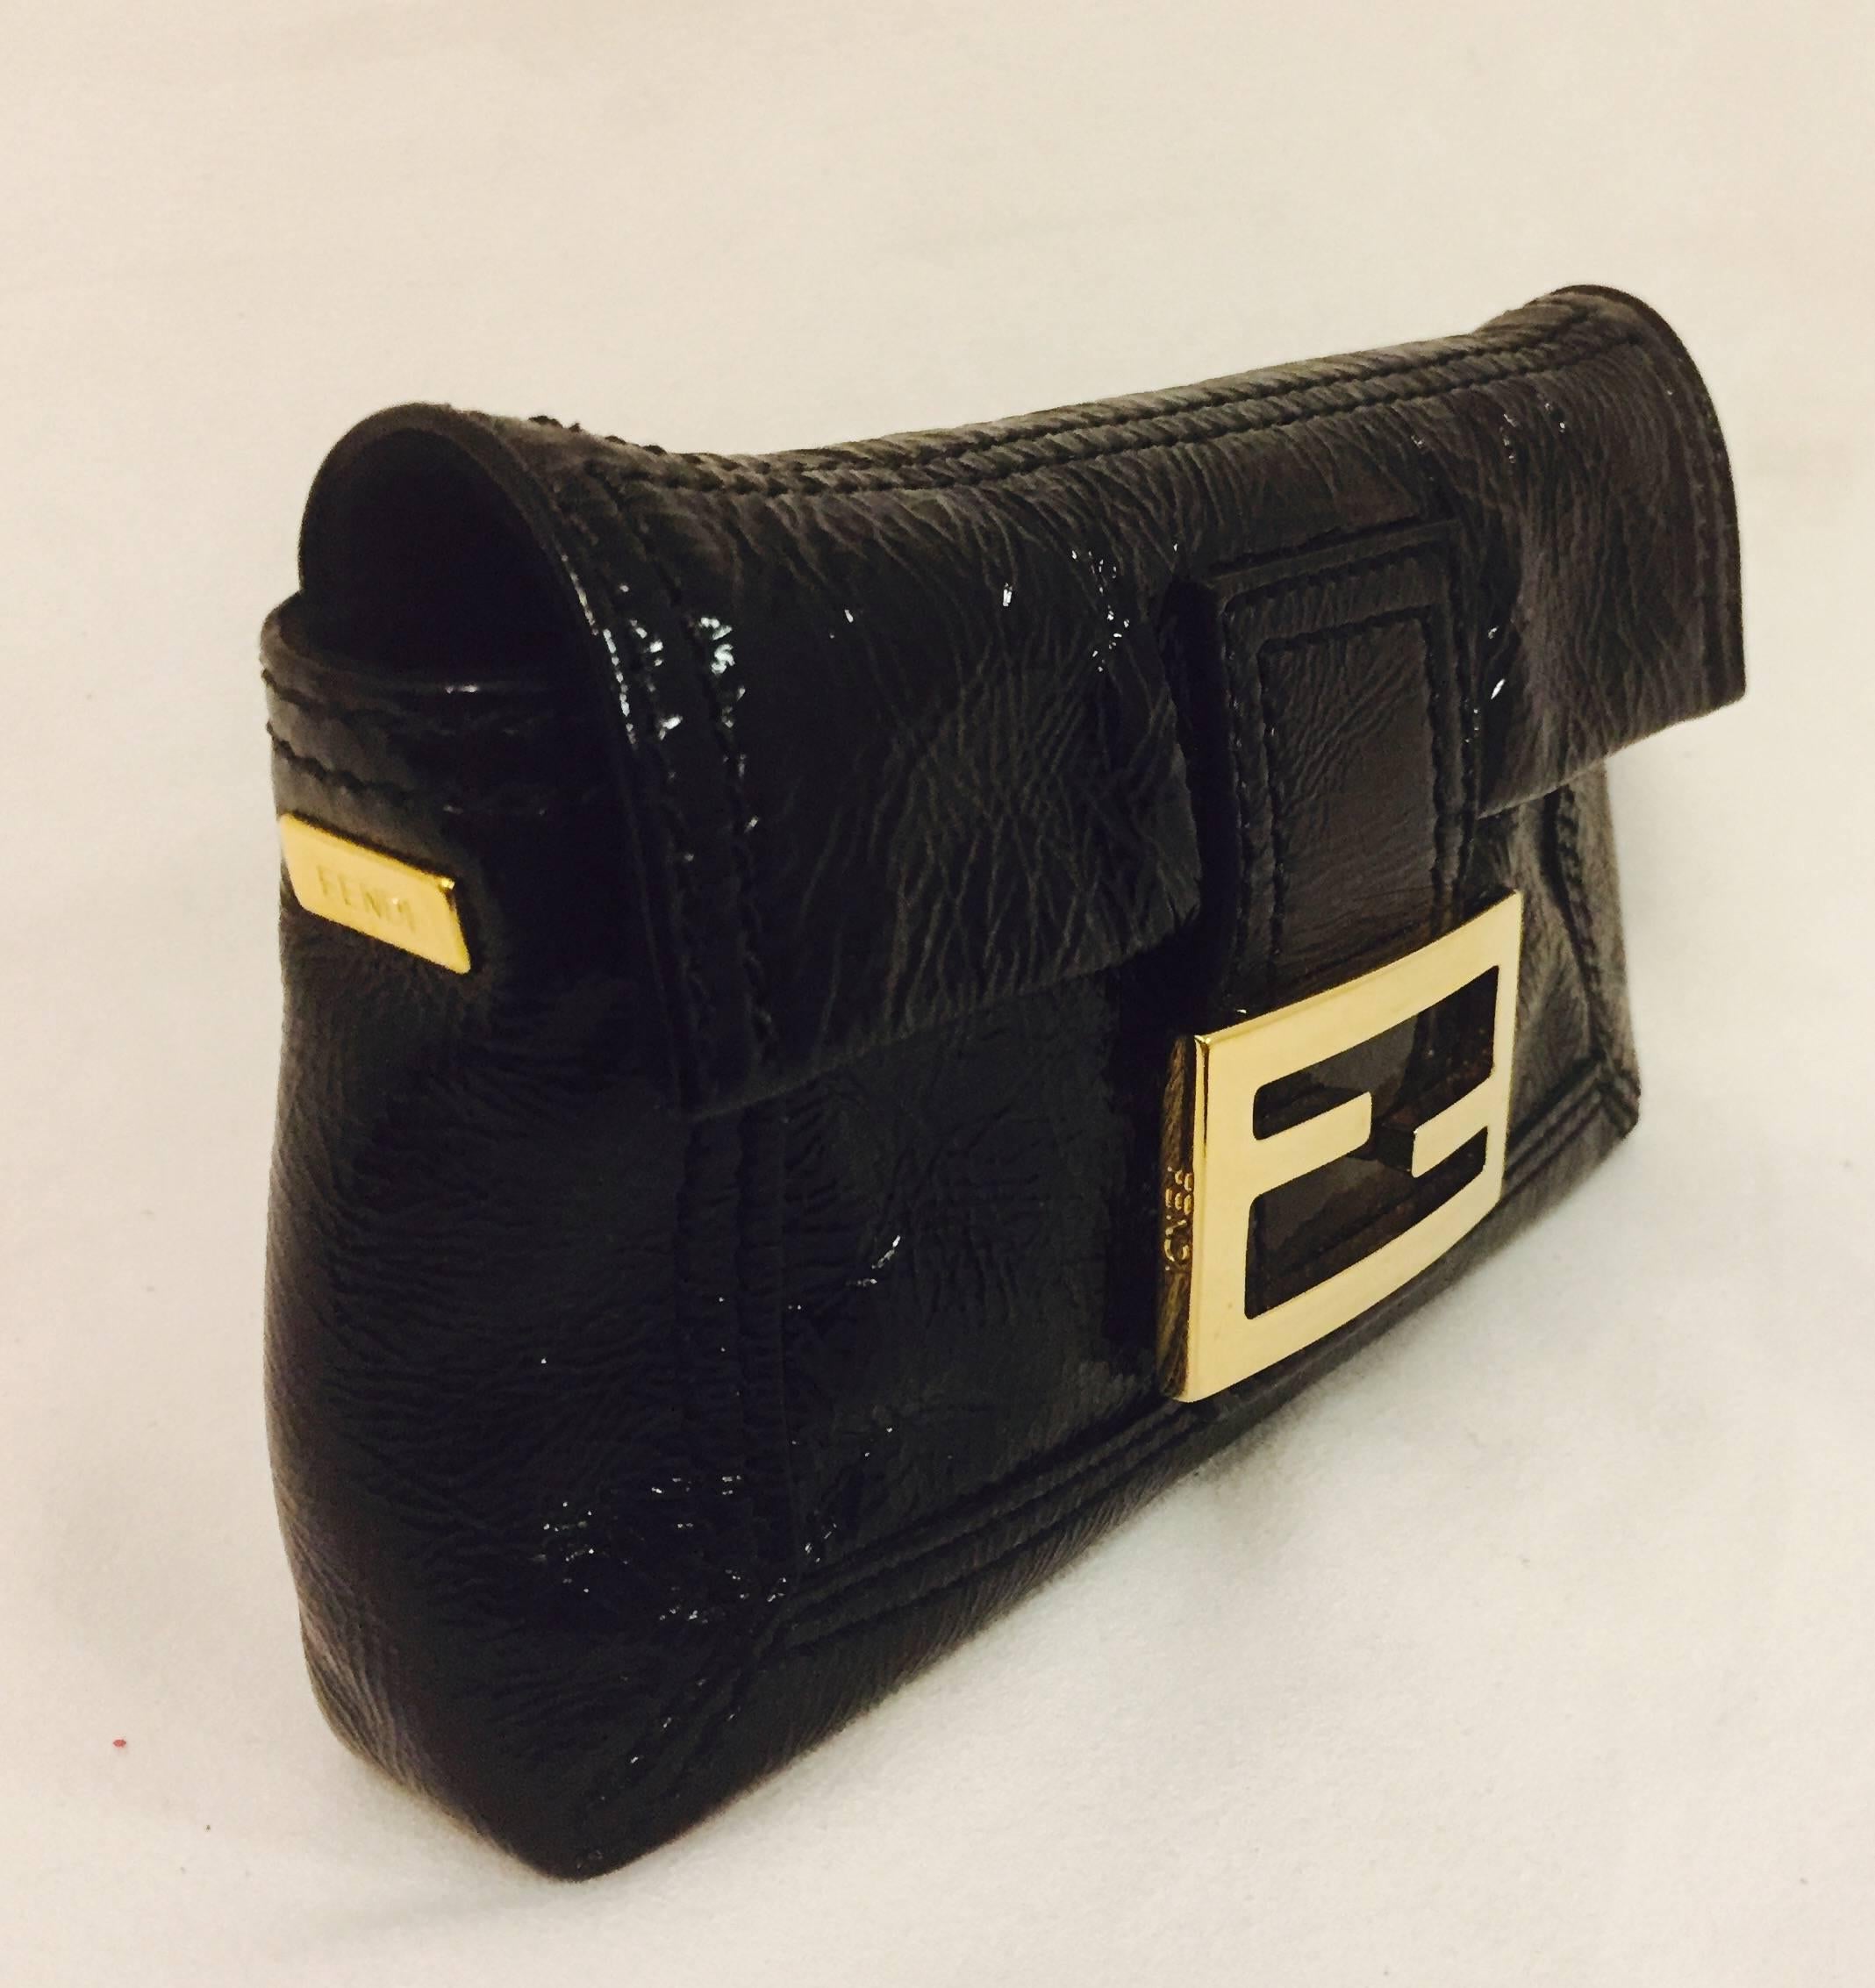 Fendi's black textured patent leather bag remains a great everyday bag that easily transitions from day to evening!  Its practical size holds one's smart phone, credit cards and make up!  The flap opening with gold tone, bold Fendi logo and magnetic